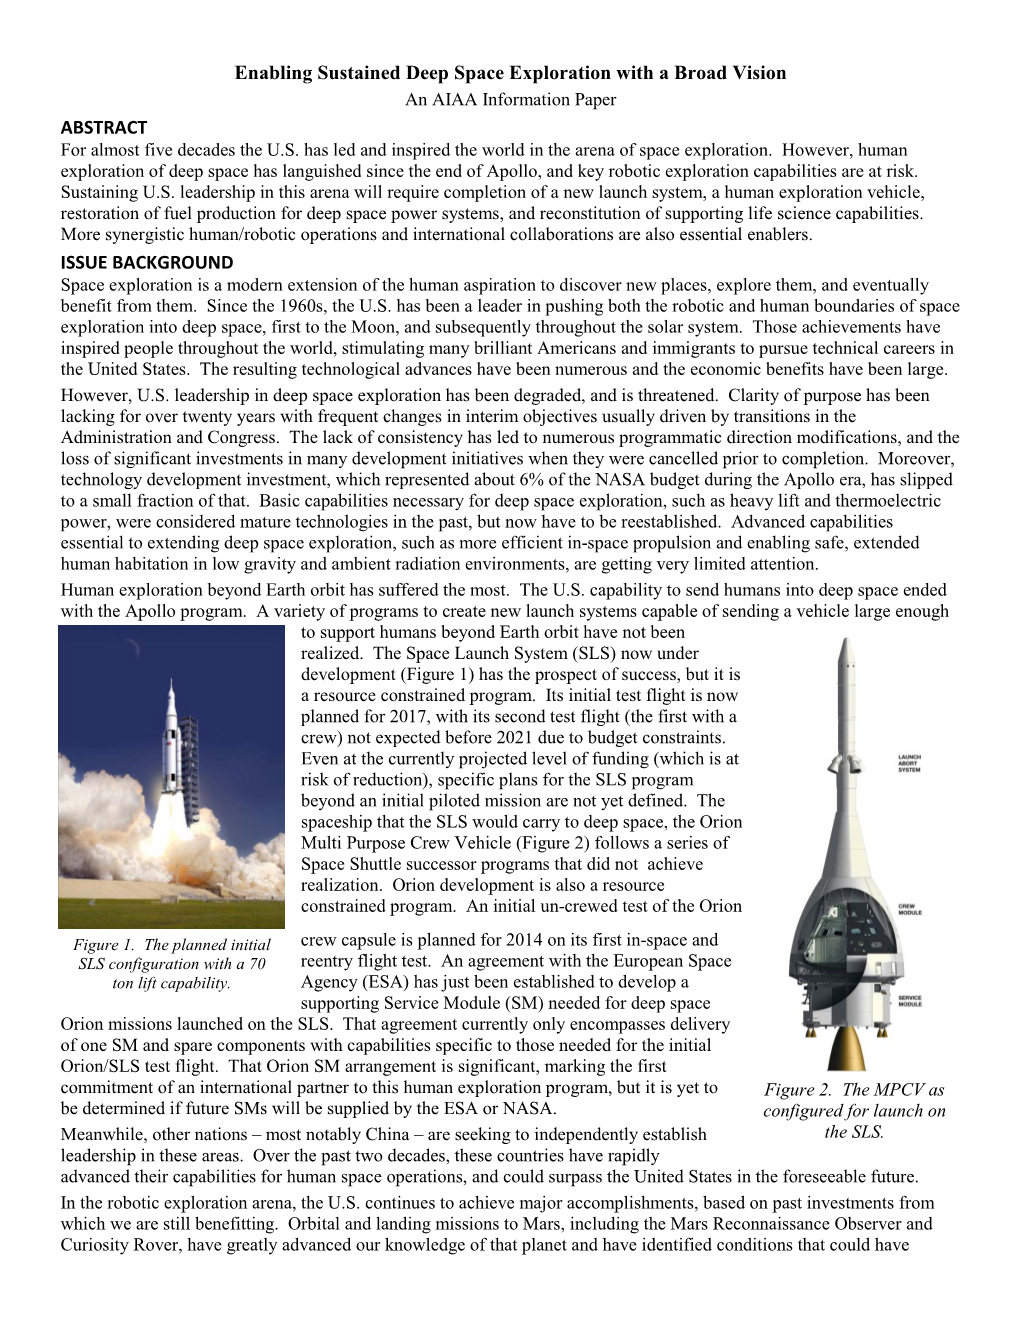 Enabling Sustained Deep Space Exploration with a Broad Vision an AIAA Information Paper ABSTRACT for Almost Five Decades the U.S